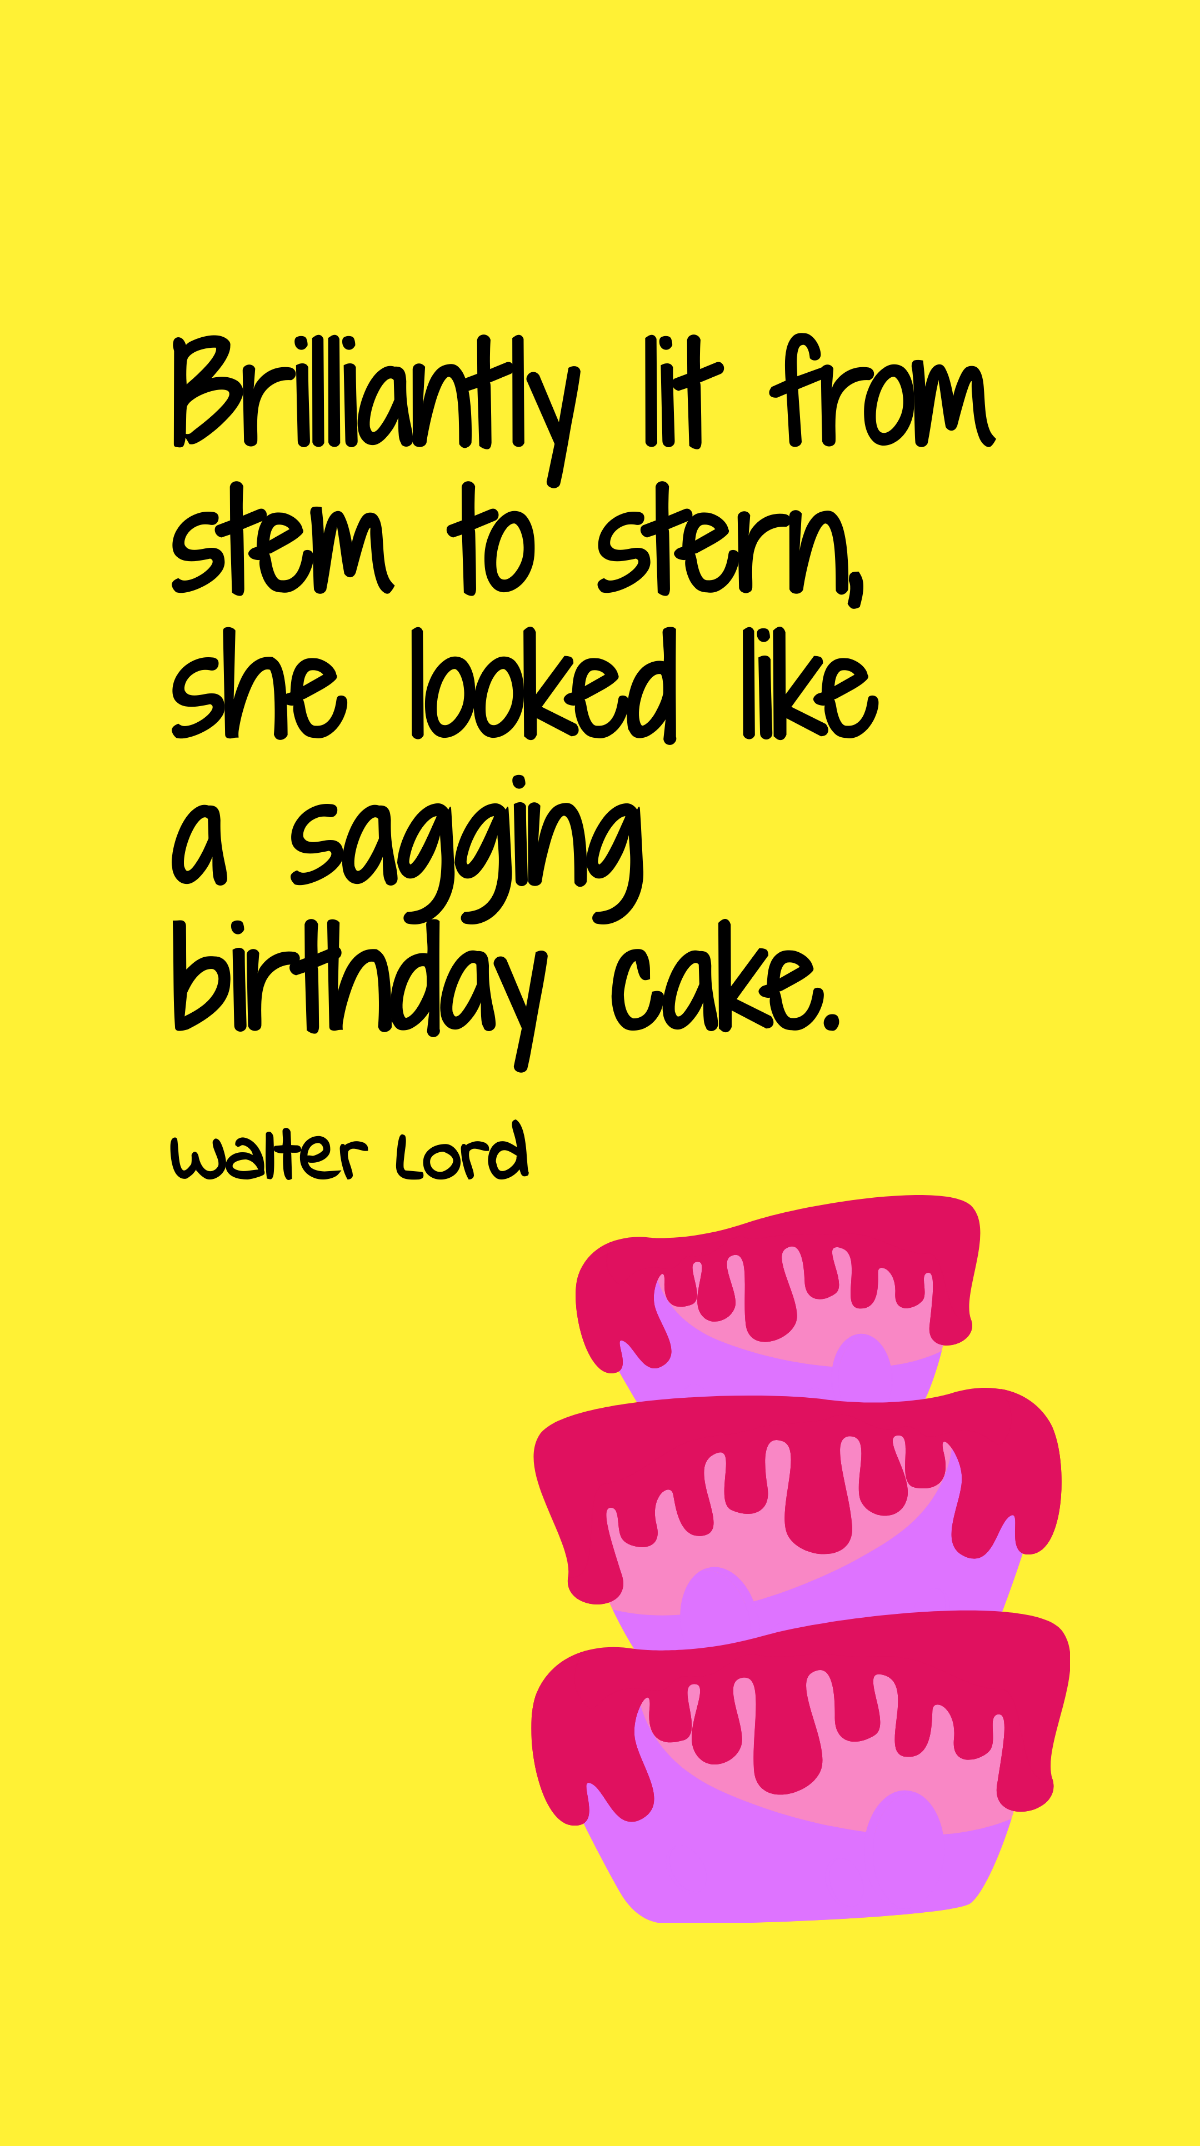 Walter Lord - Brilliantly lit from stem to stern, she looked like a sagging birthday cake.